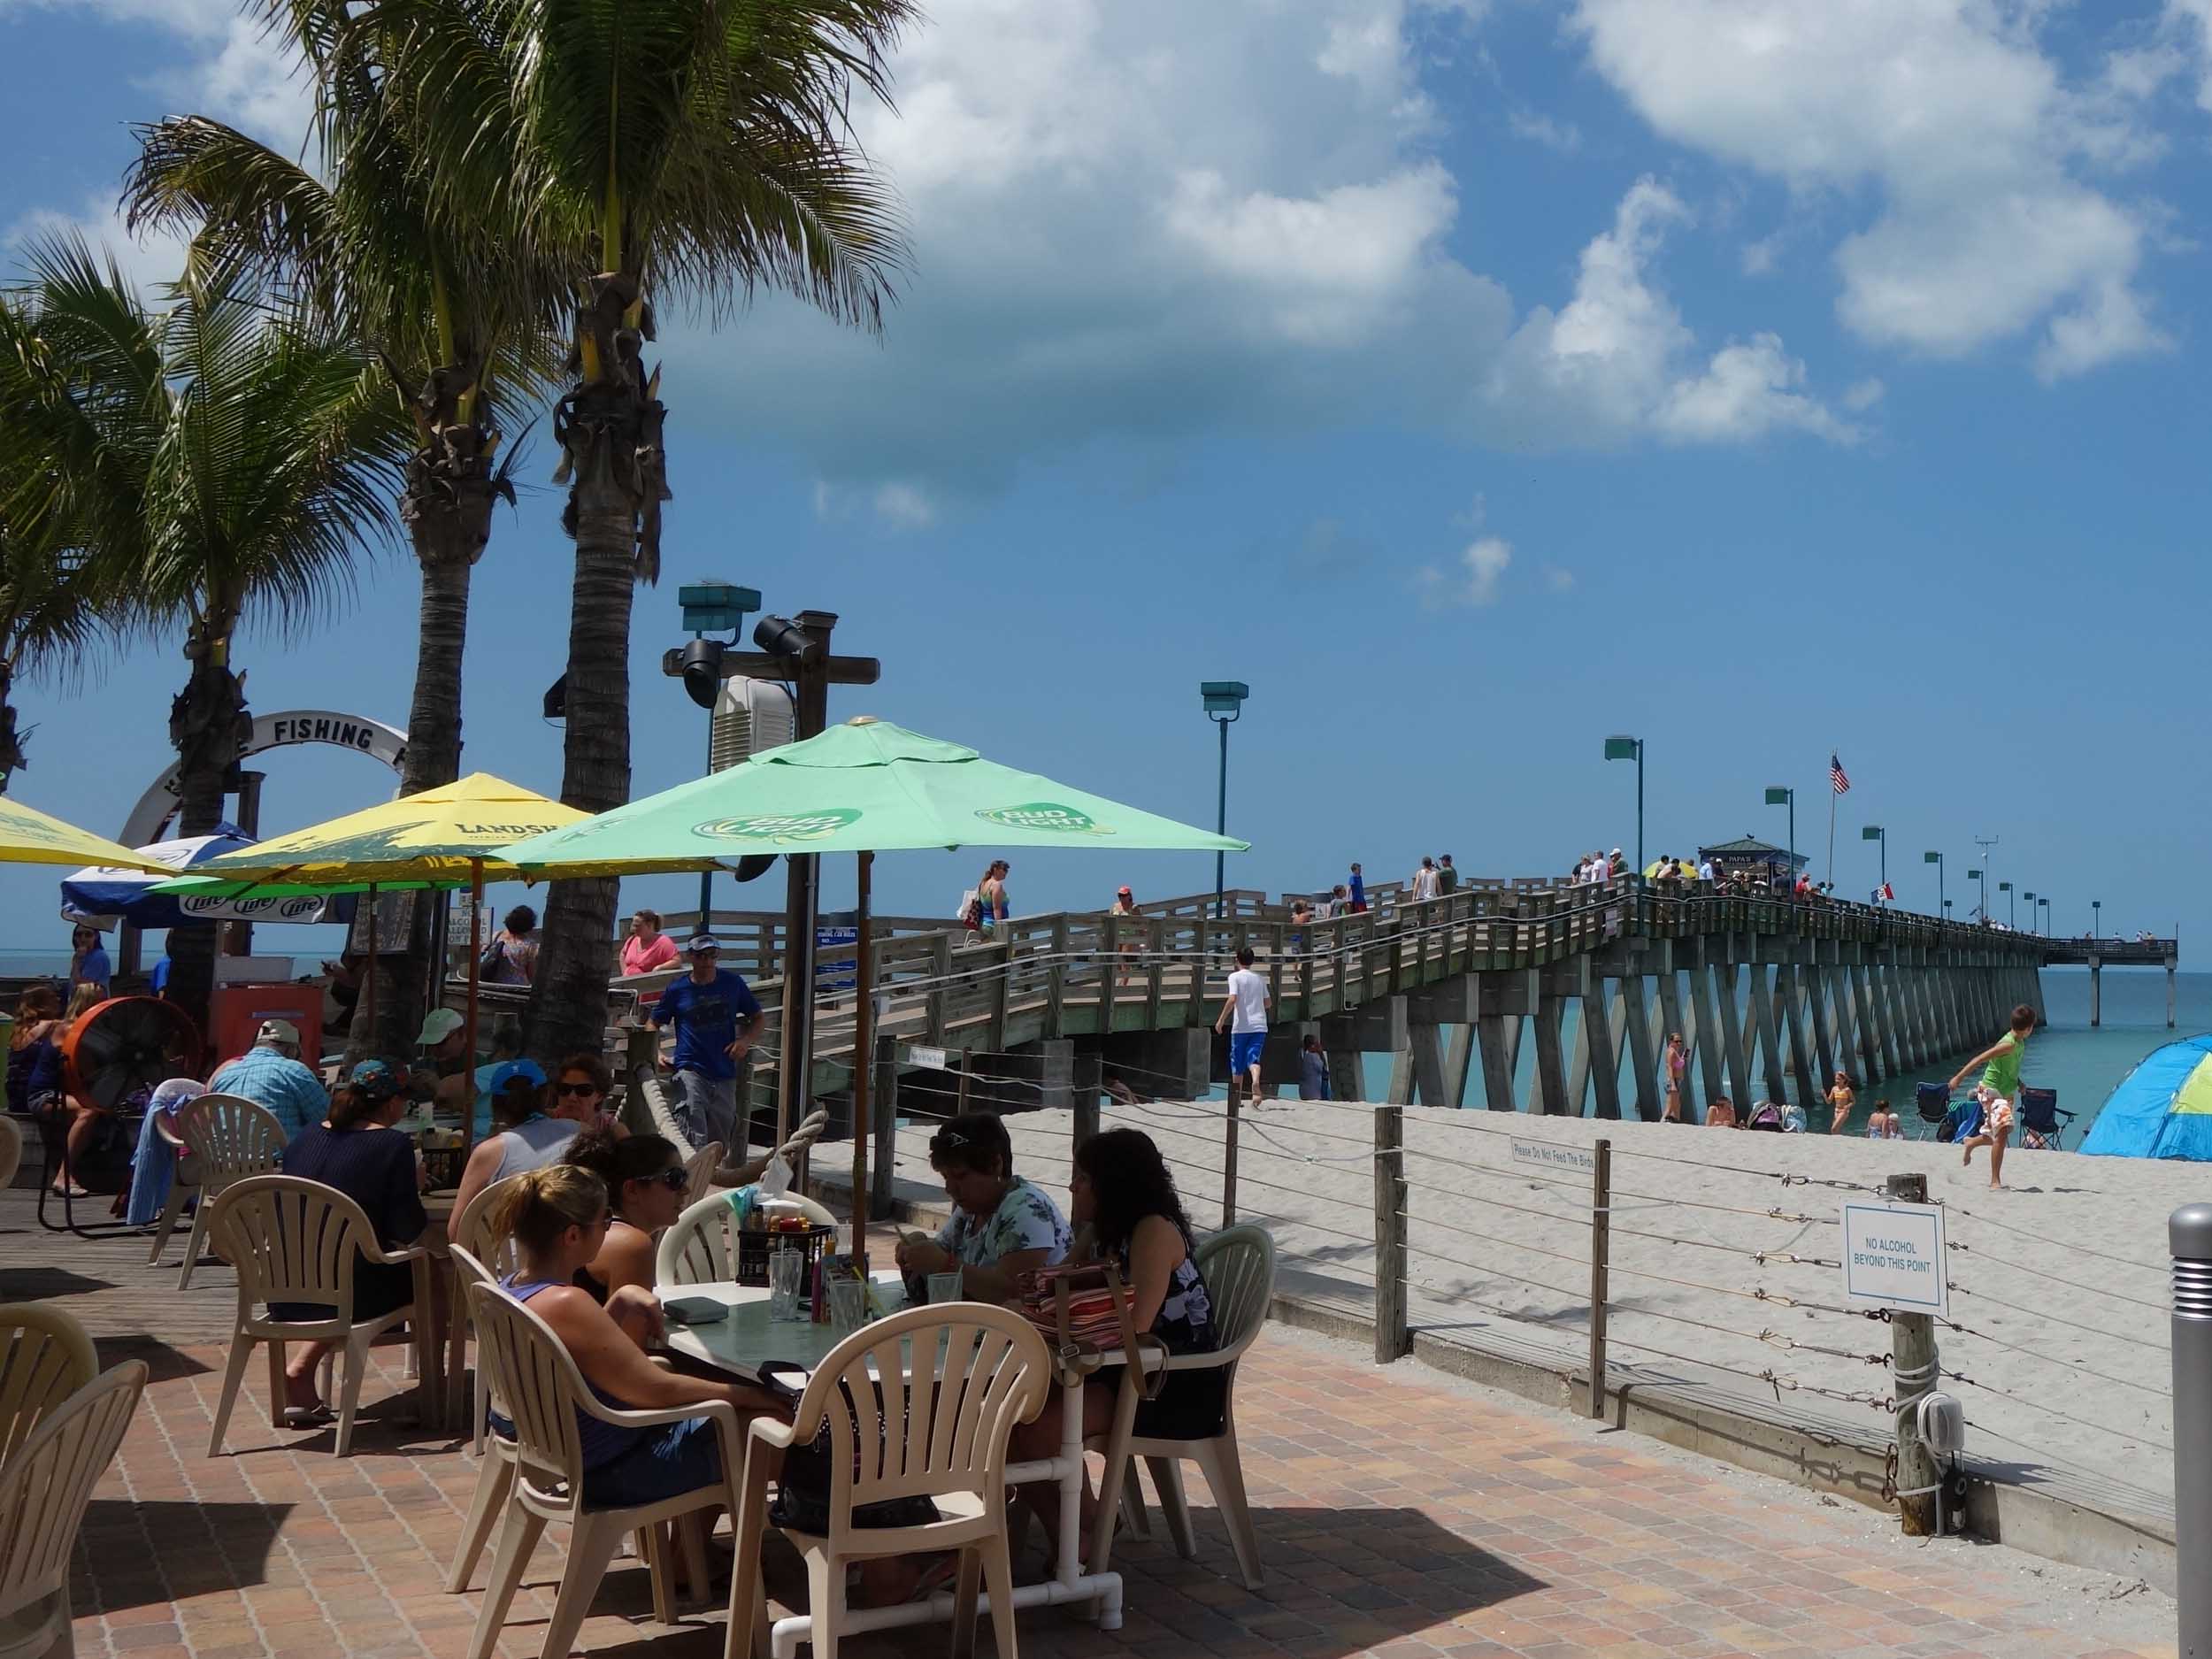 Sharky's on the Pier View